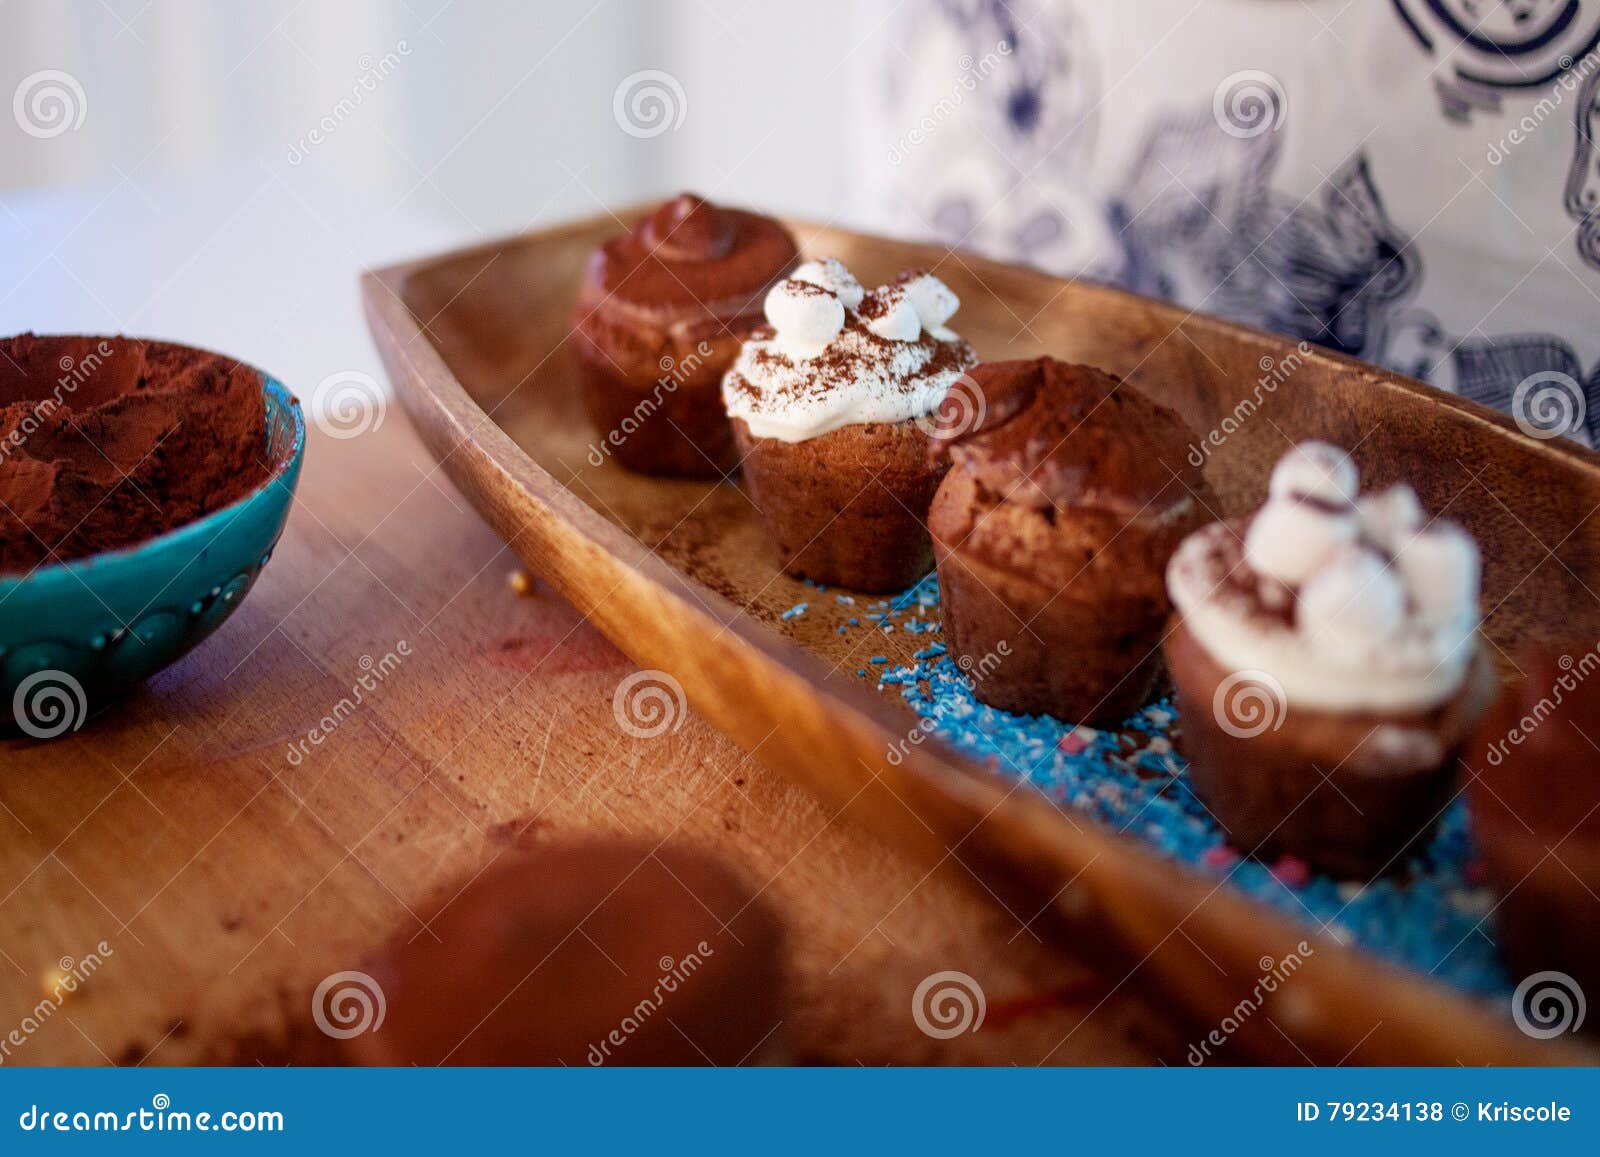 Cooking Cupcakes, Muffins and a Plate of Ingredients for